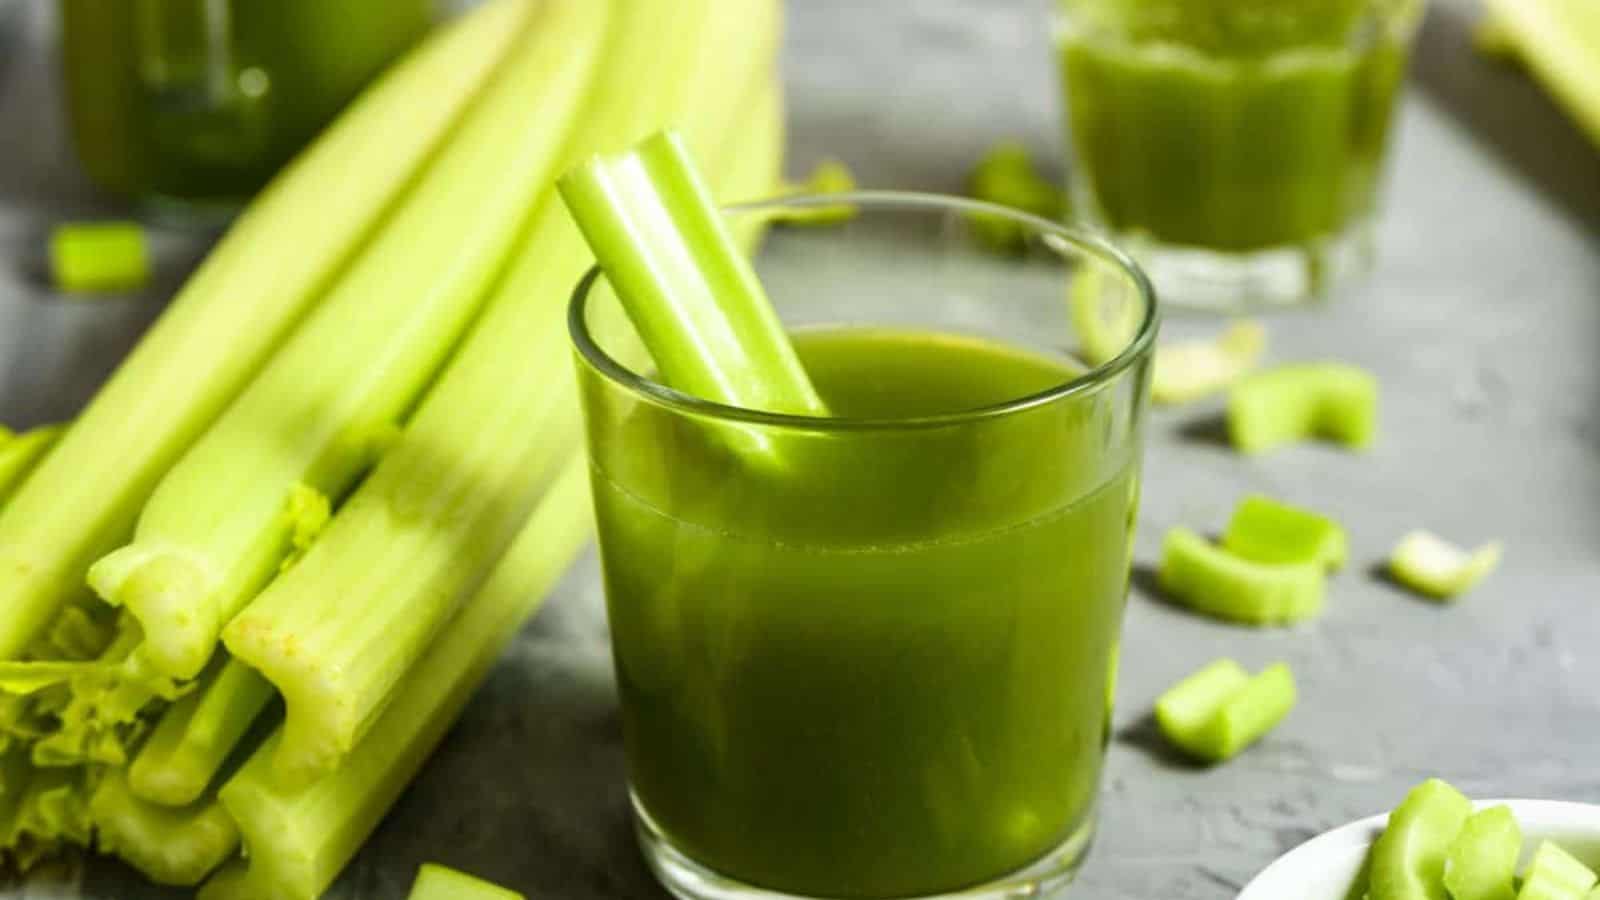 Celery sprigs and celery stick on celery smoothie displayed on a countertop. 